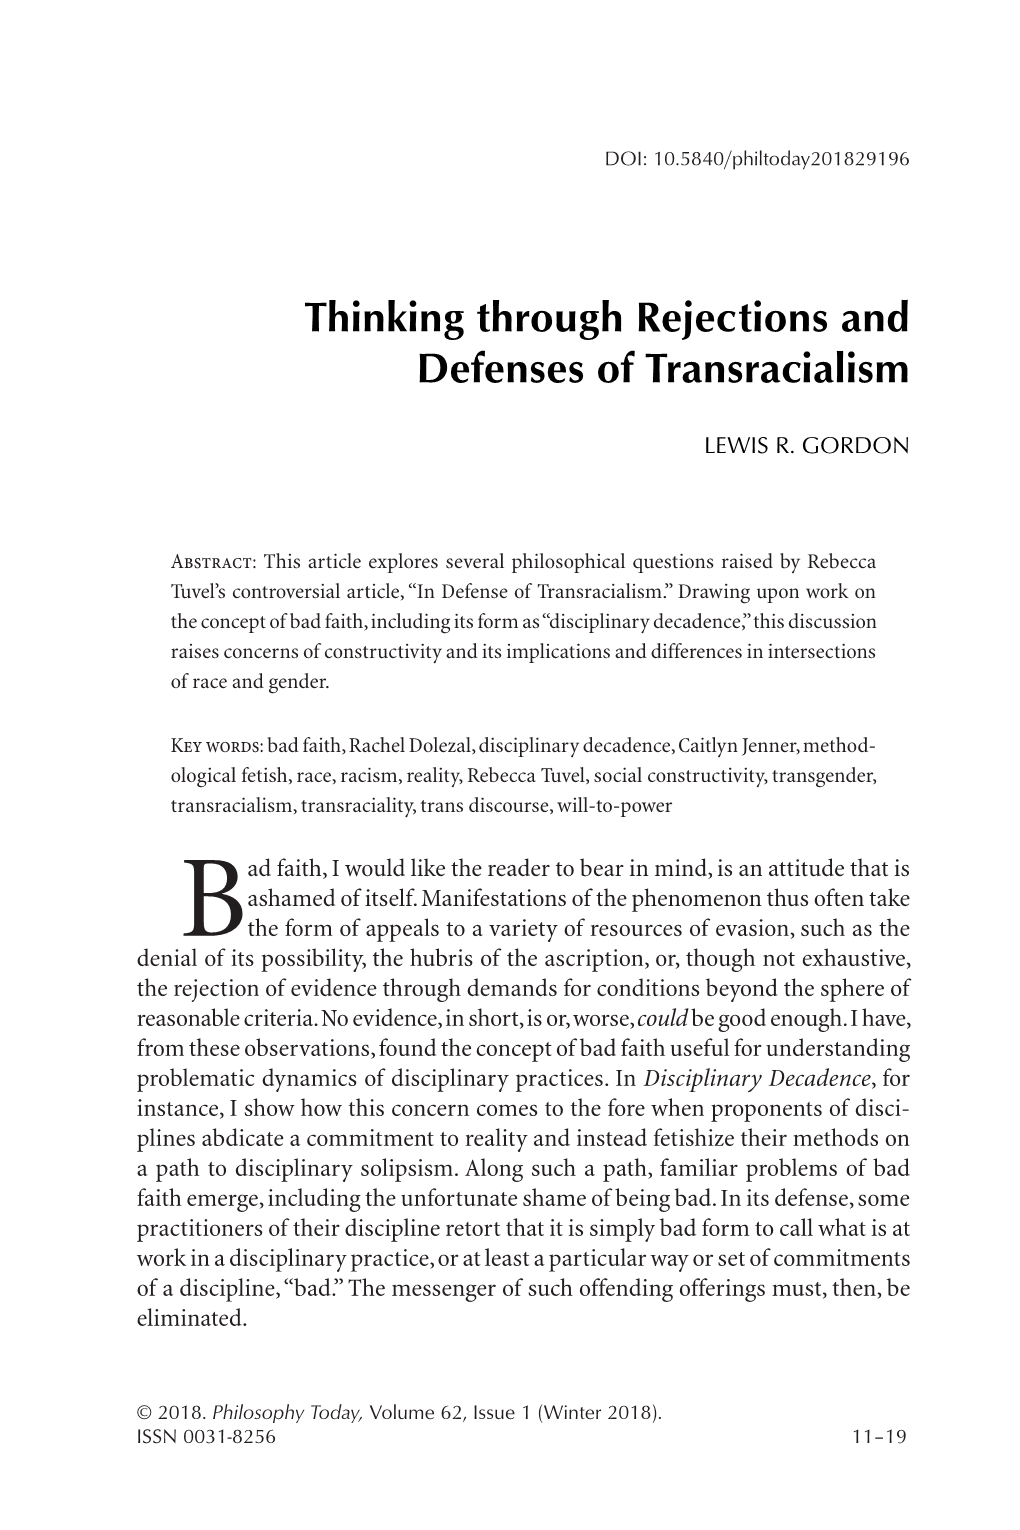 Thinking Through Rejections and Defenses of Transracialism